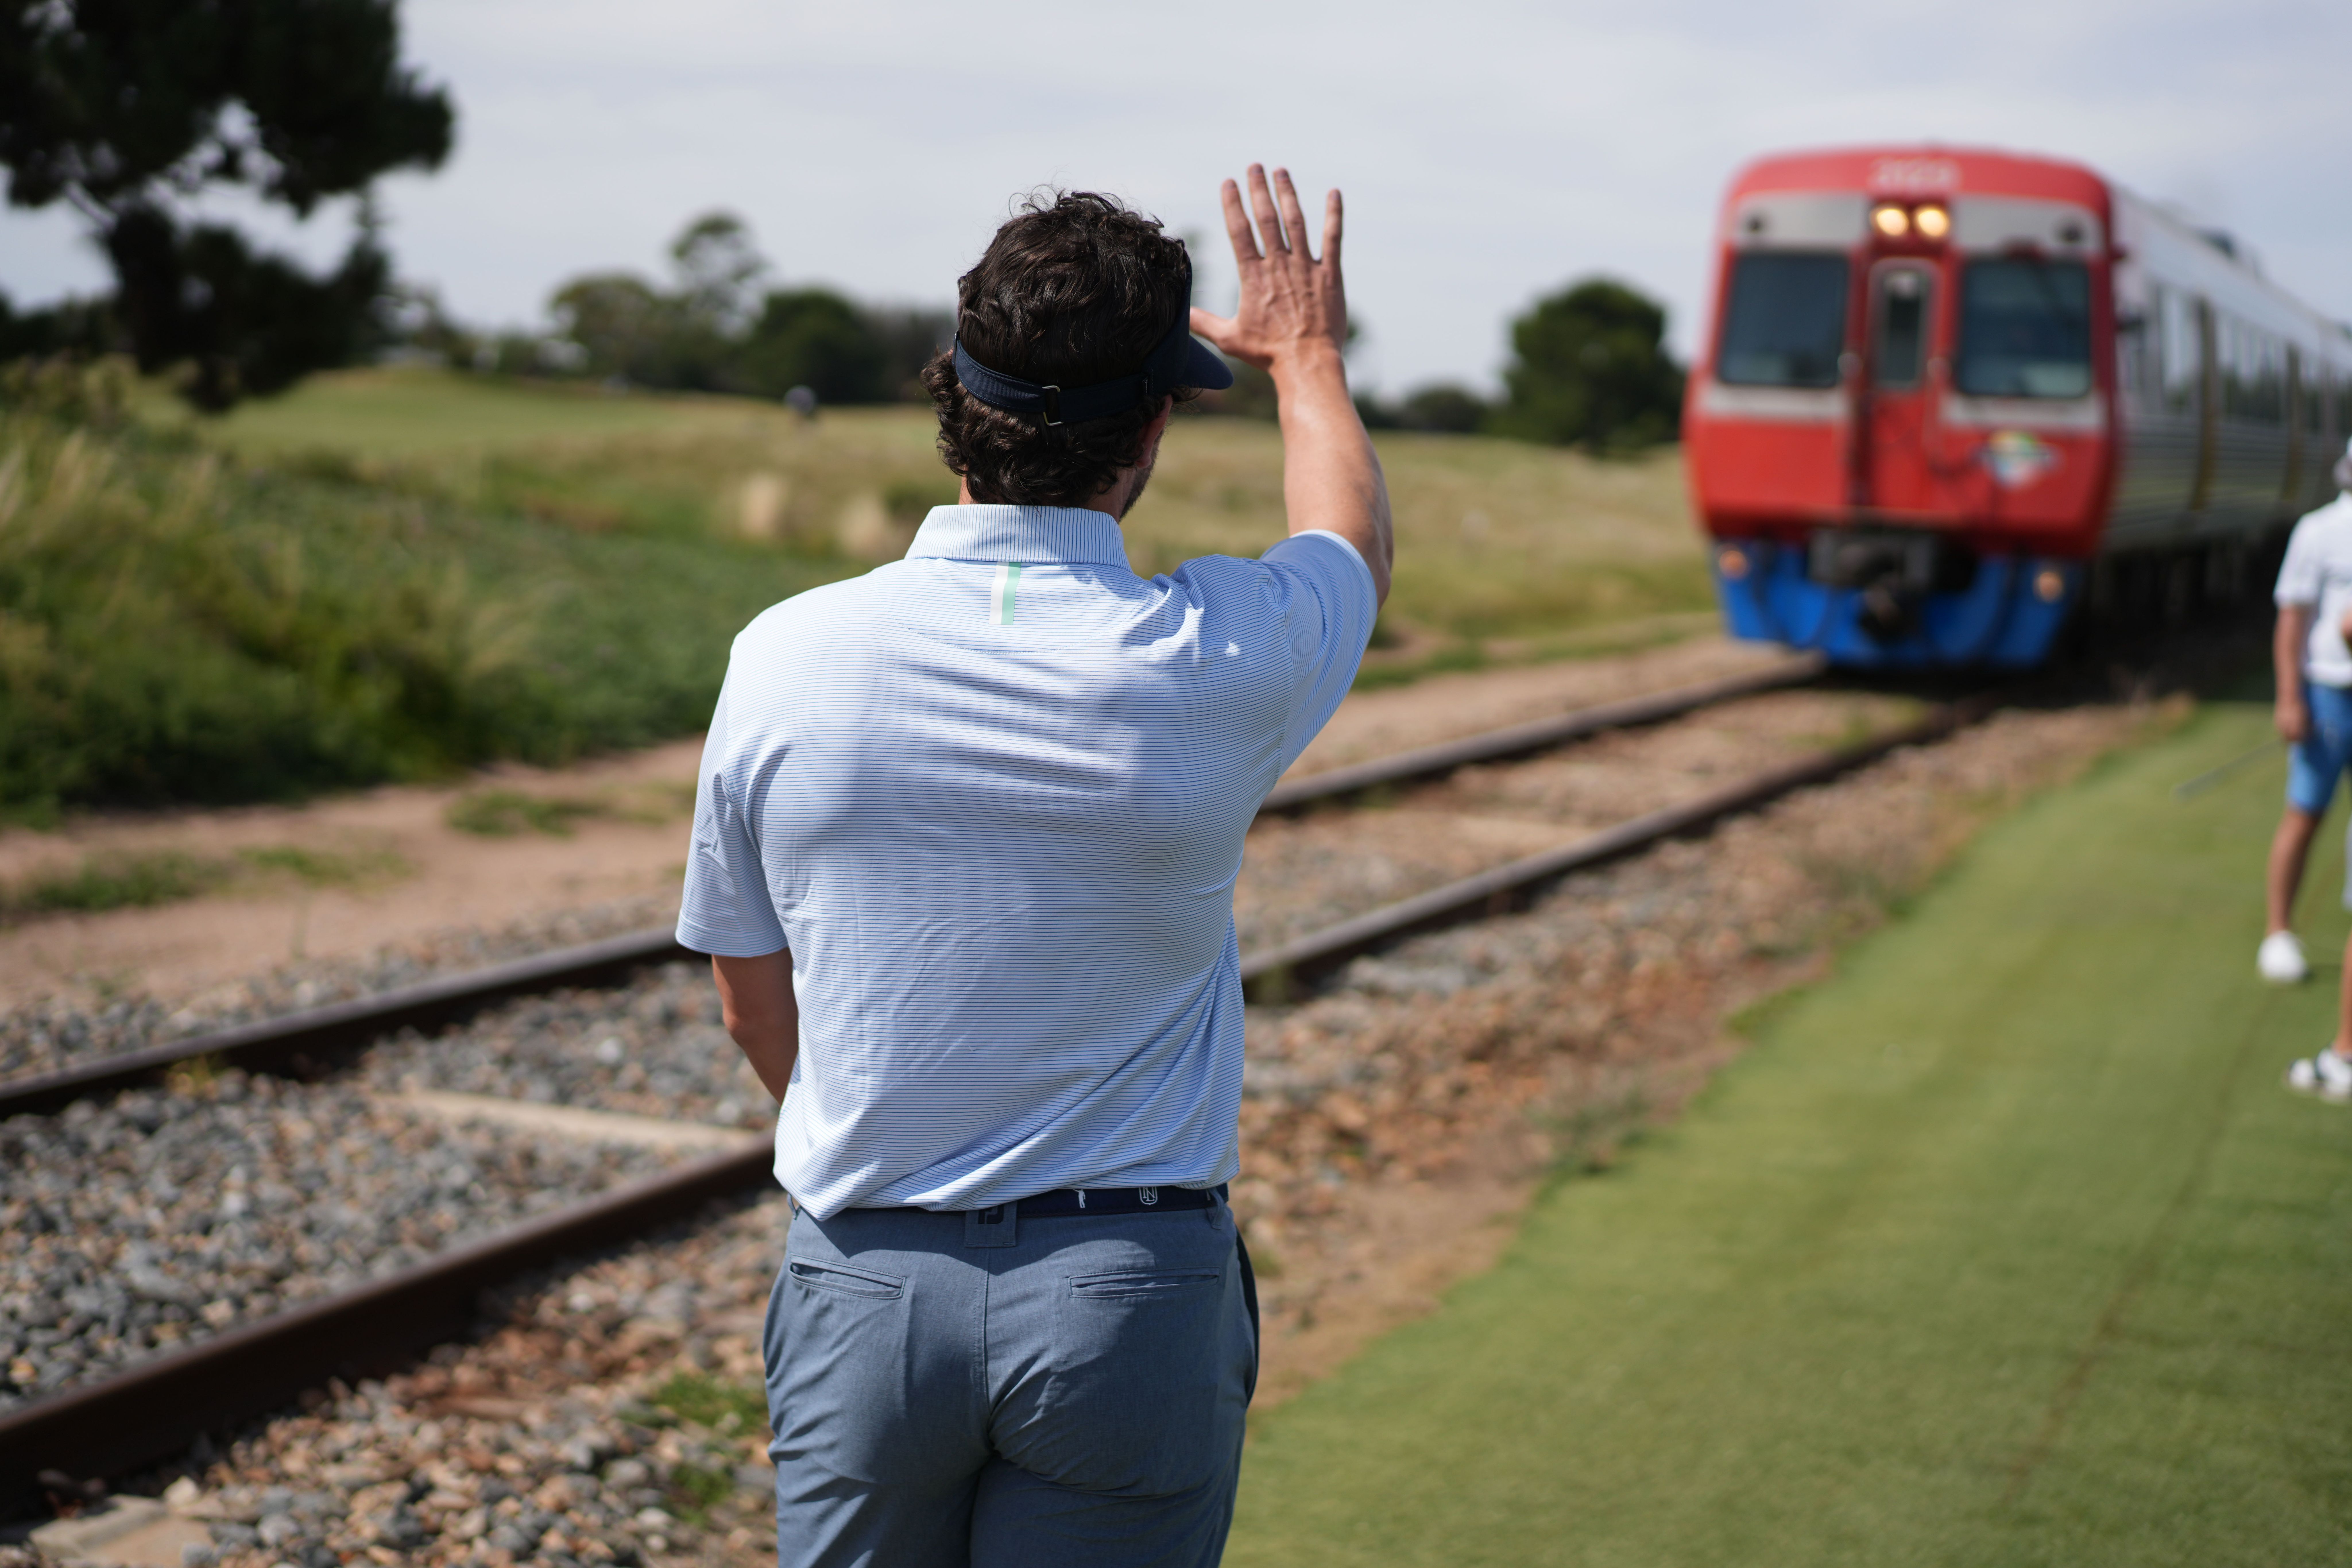 Neil greeting the traIn at Royal Adelaide.